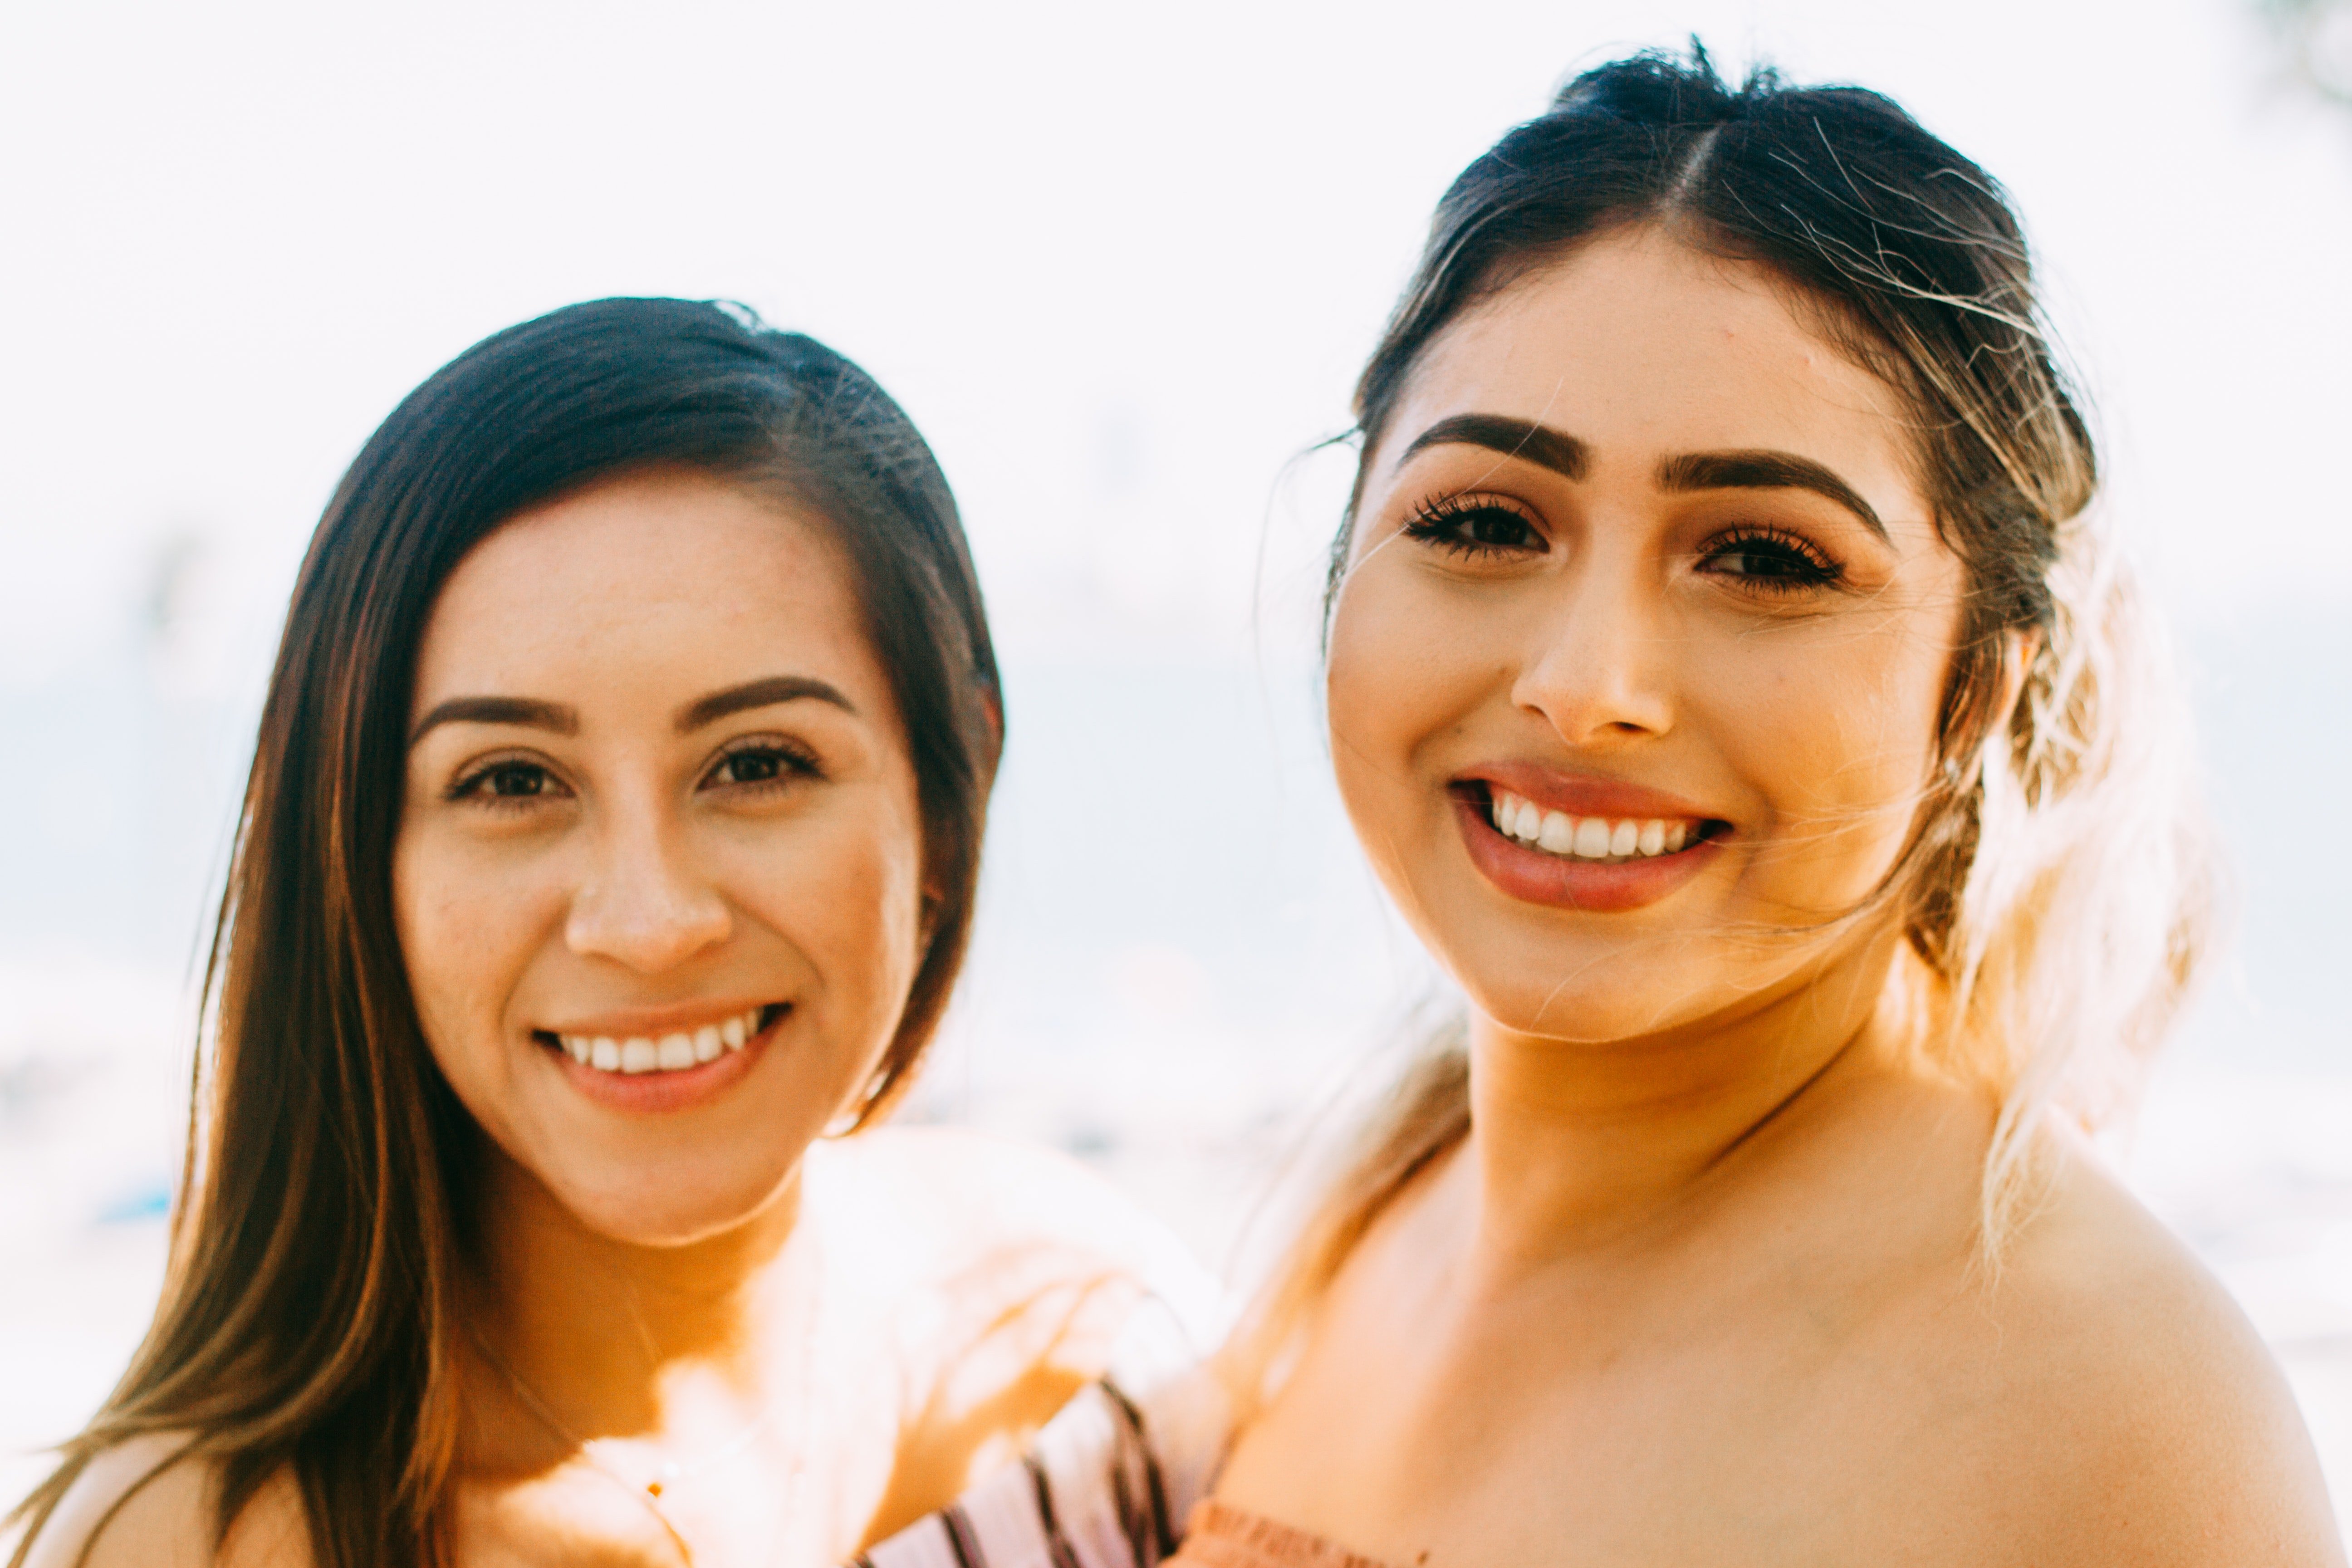 Elsa and Sarah had started out as the best of friends. | Source: Unsplash